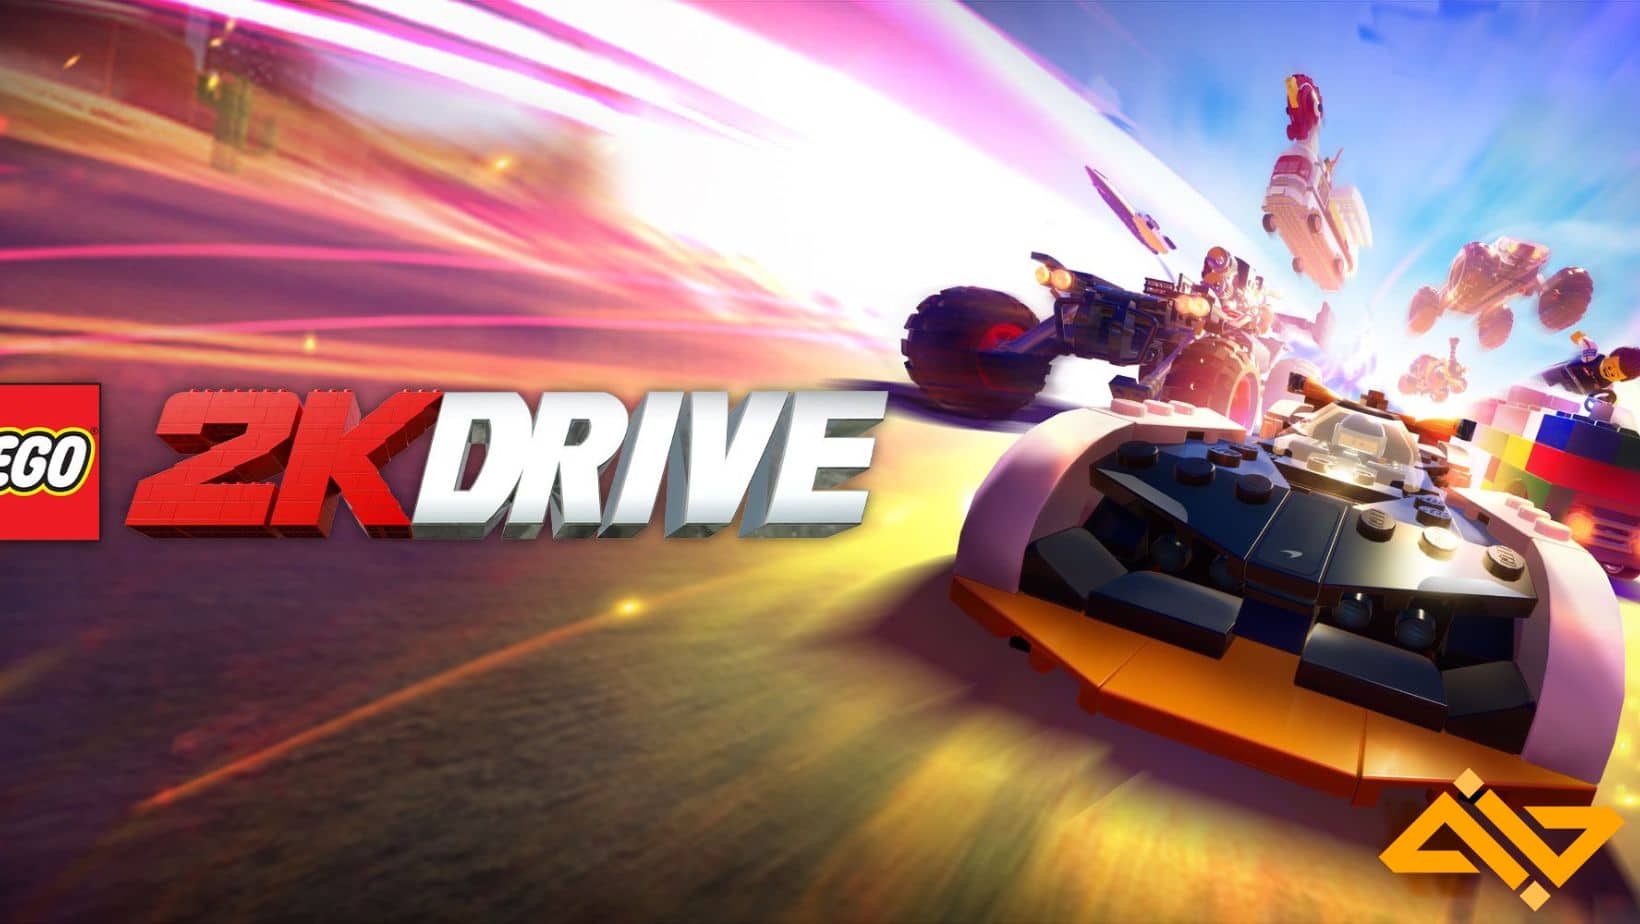 2K Drive is an awesome racing game that offers a vast open world where you can do whatever you want.